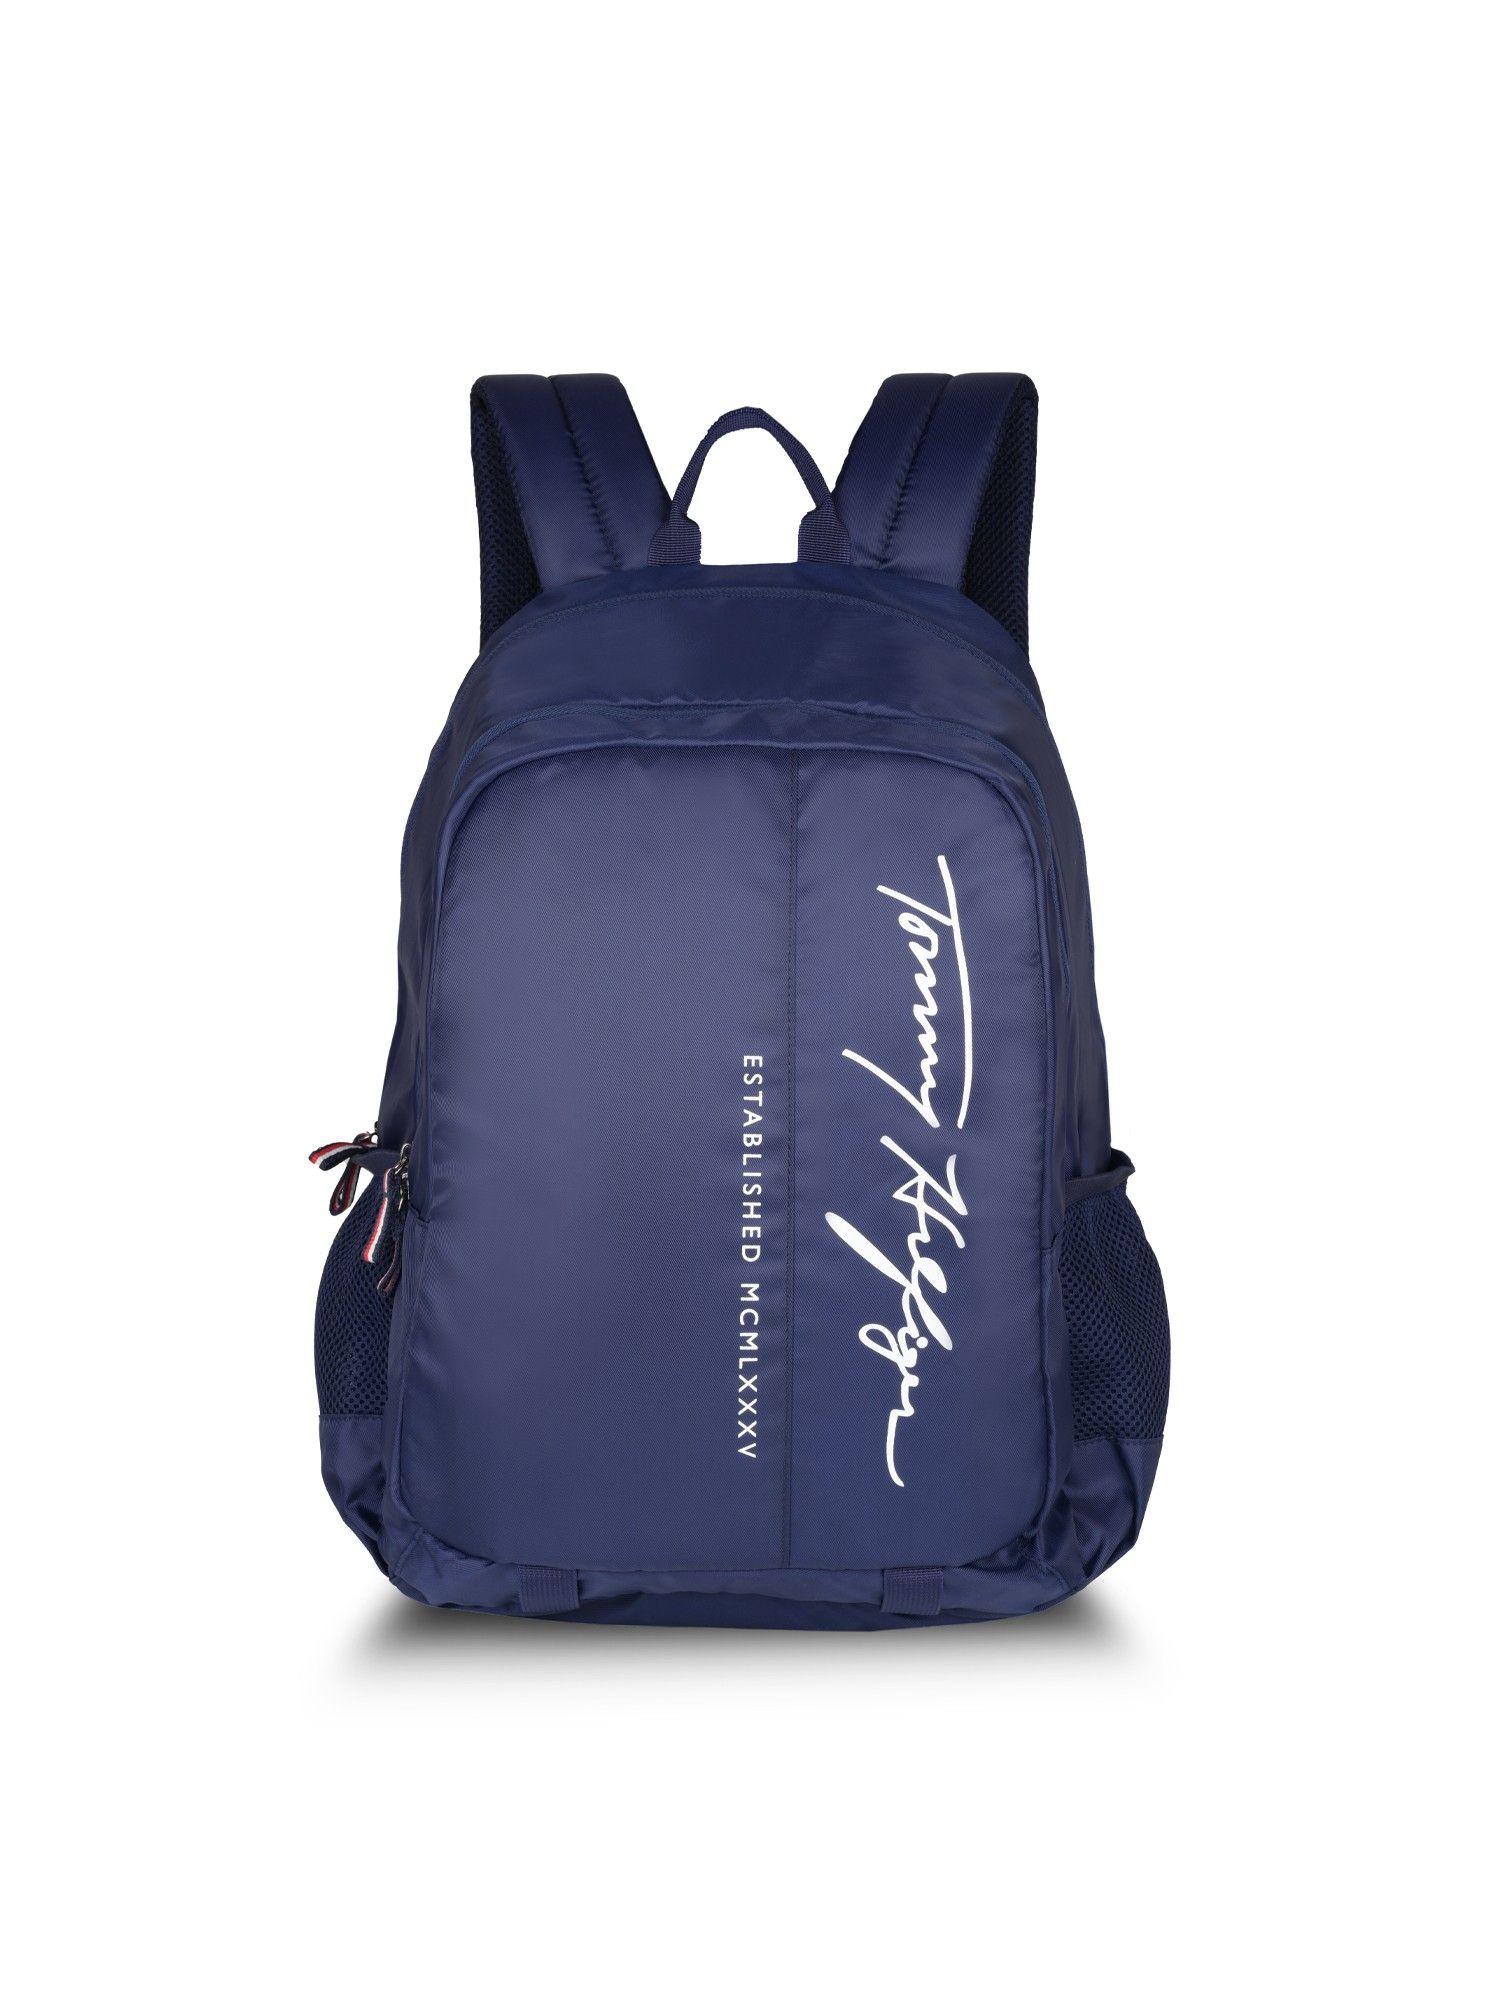 haiden-laptop-backpack-printed-navy-blue-8903496179507